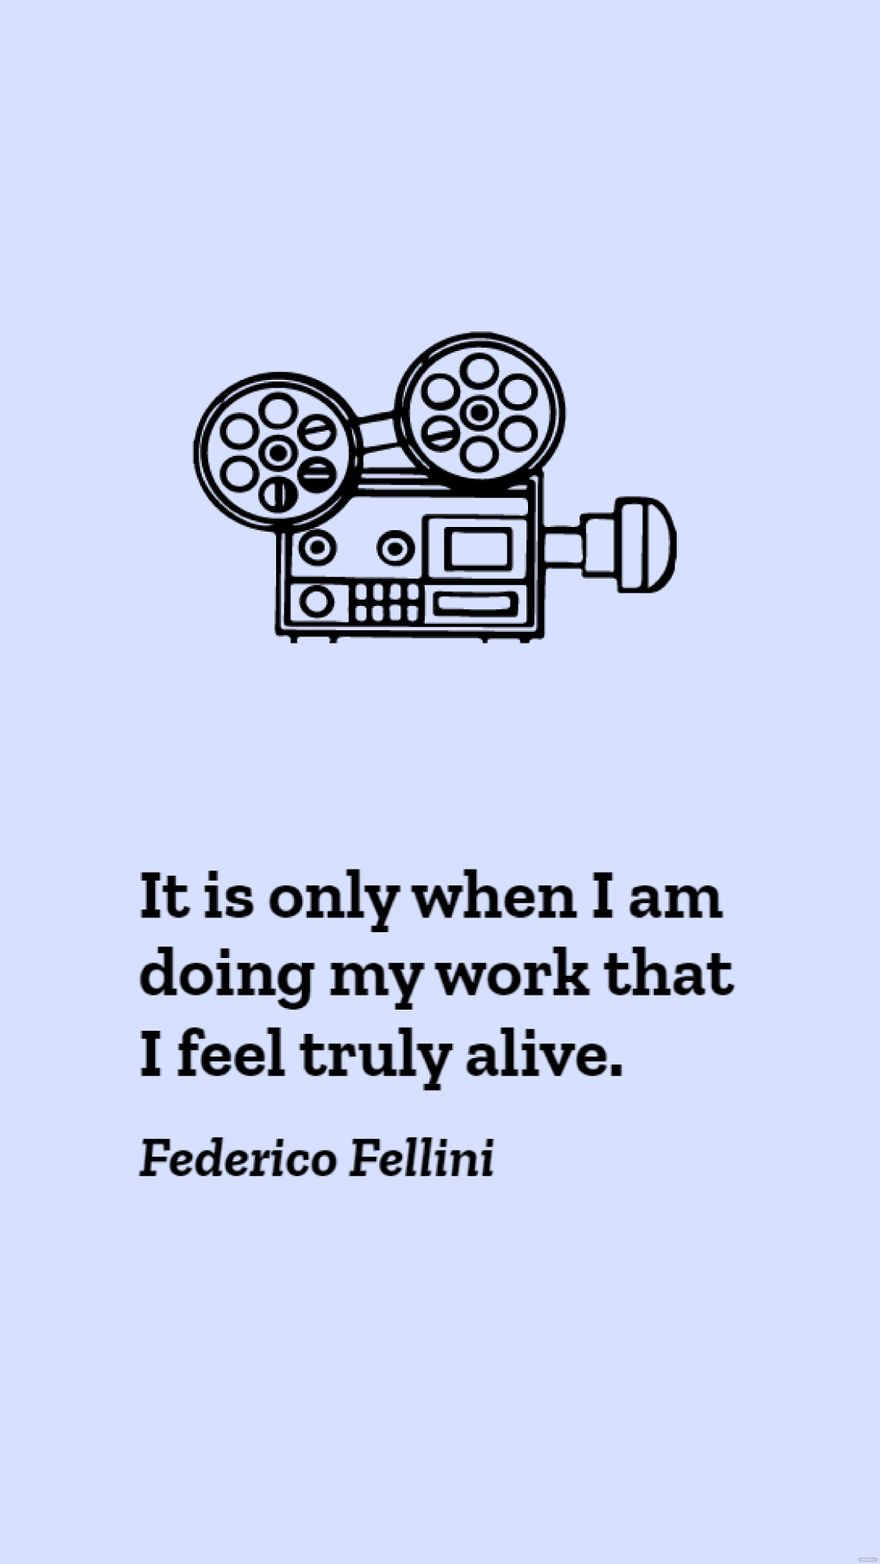 Federico Fellini - It is only when I am doing my work that I feel truly alive. in JPG